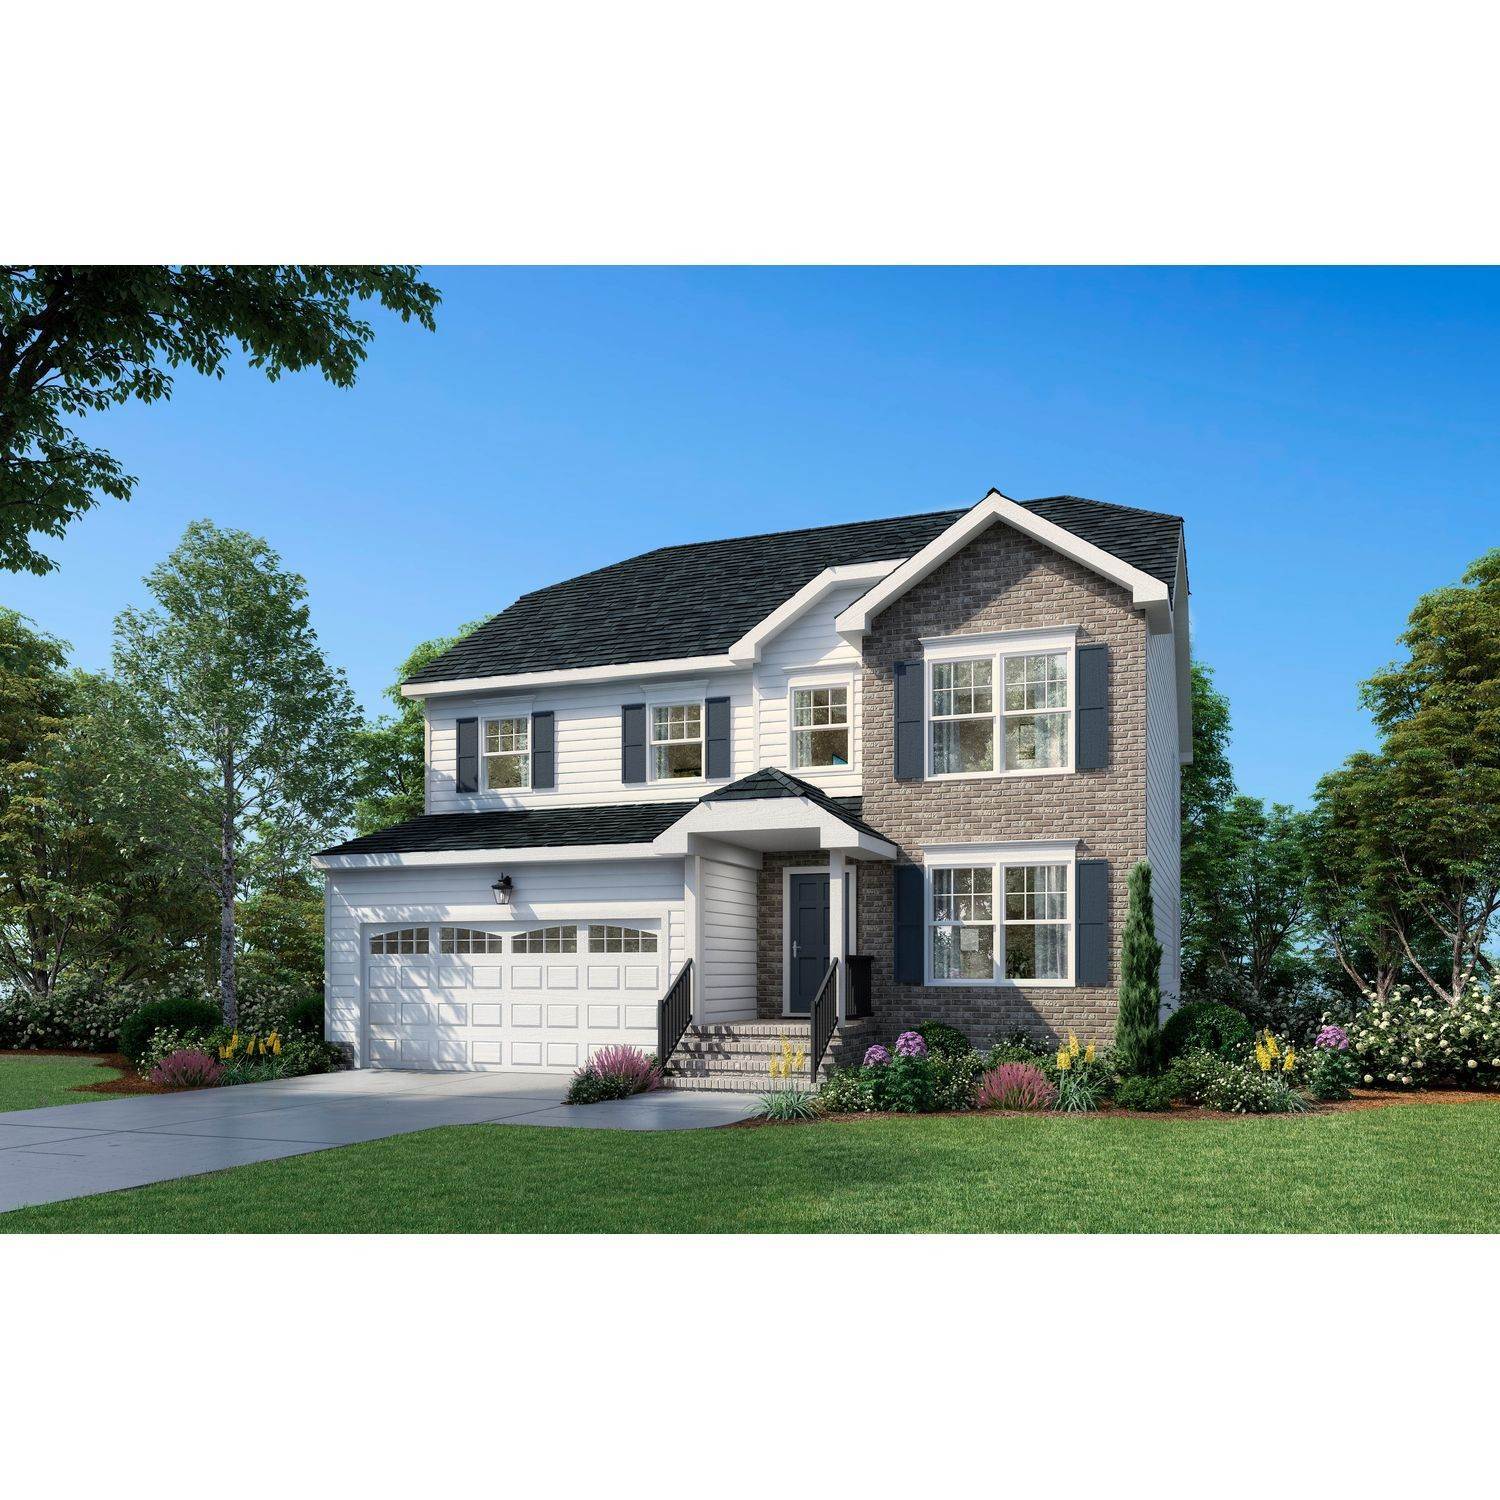 18. Single Family for Sale at Chester, VA 23831